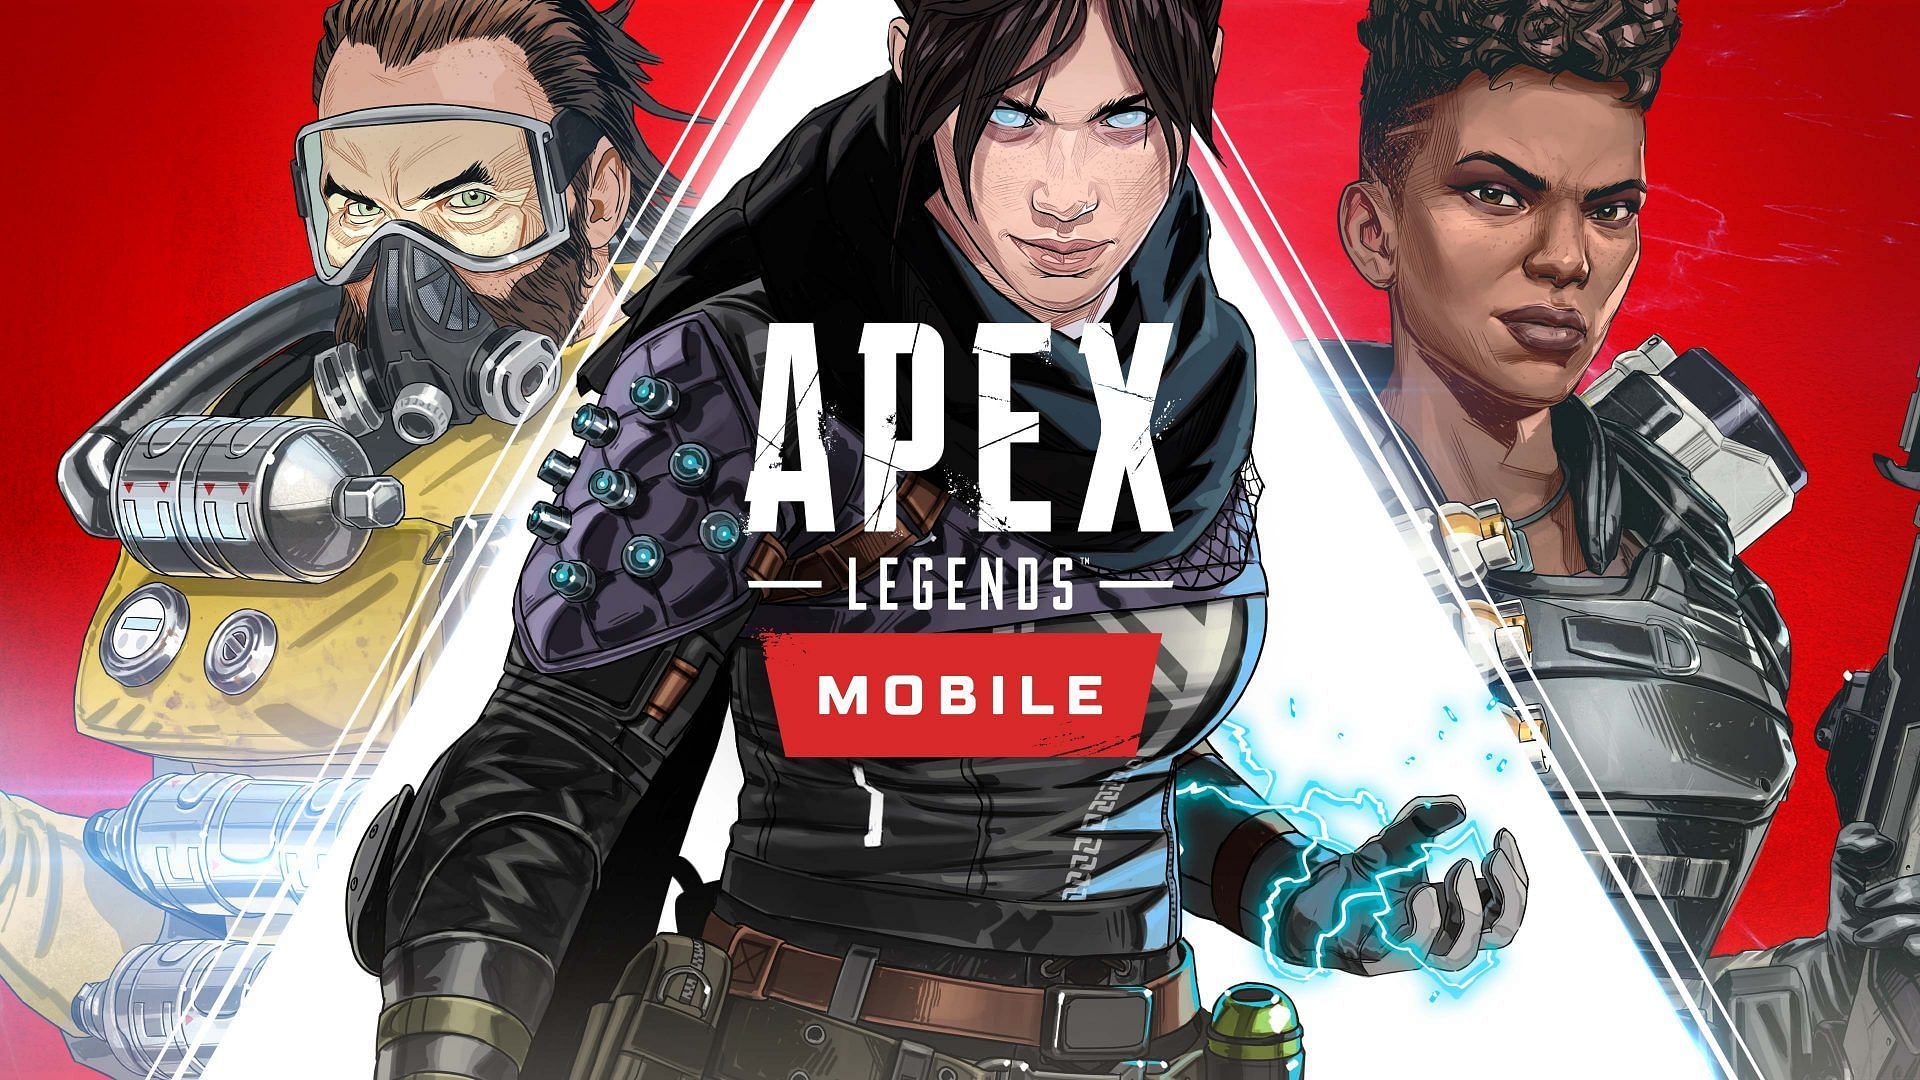 Apex Legends Mobile soft launch is live in selected regions and players can explore the different contents of the new title (Image via Respawn)